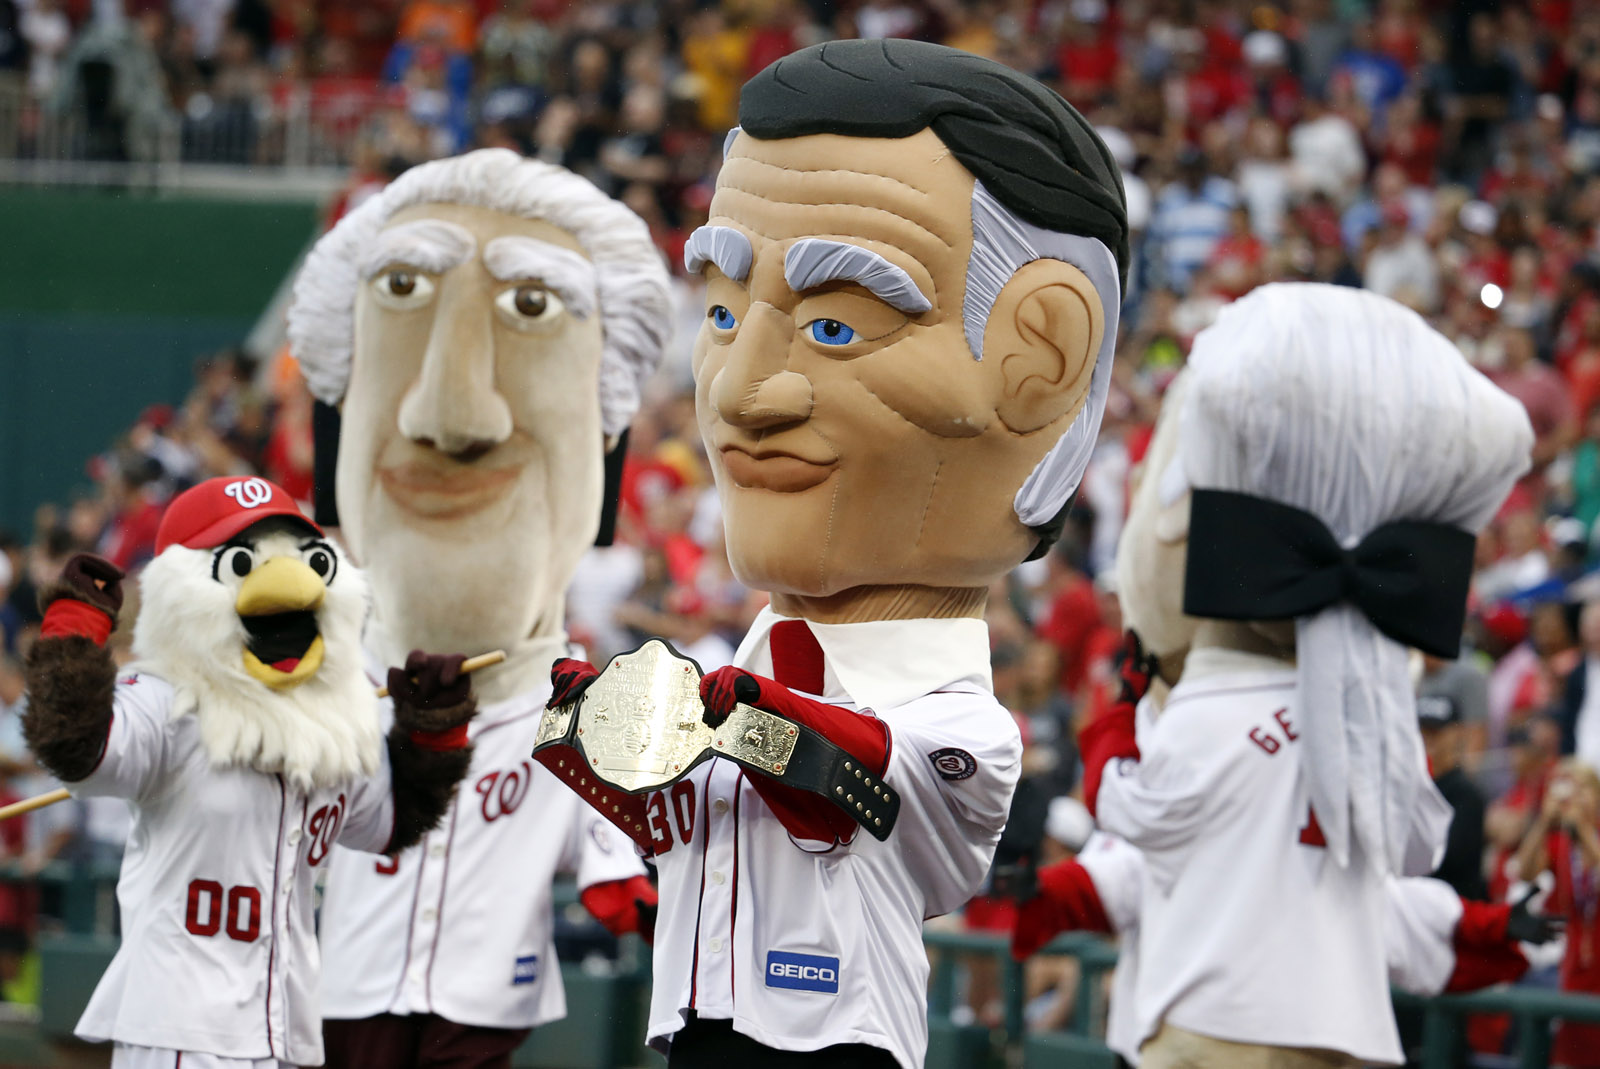 Racing President mascot President Calvin Coolidge holds the winner's belt after winning his first race during the fourth inning of a baseball game between the Washington Nationals and the San Francisco Giants at Nationals Park, Friday, July 3, 2015, in Washington. (AP Photo/Alex Brandon)